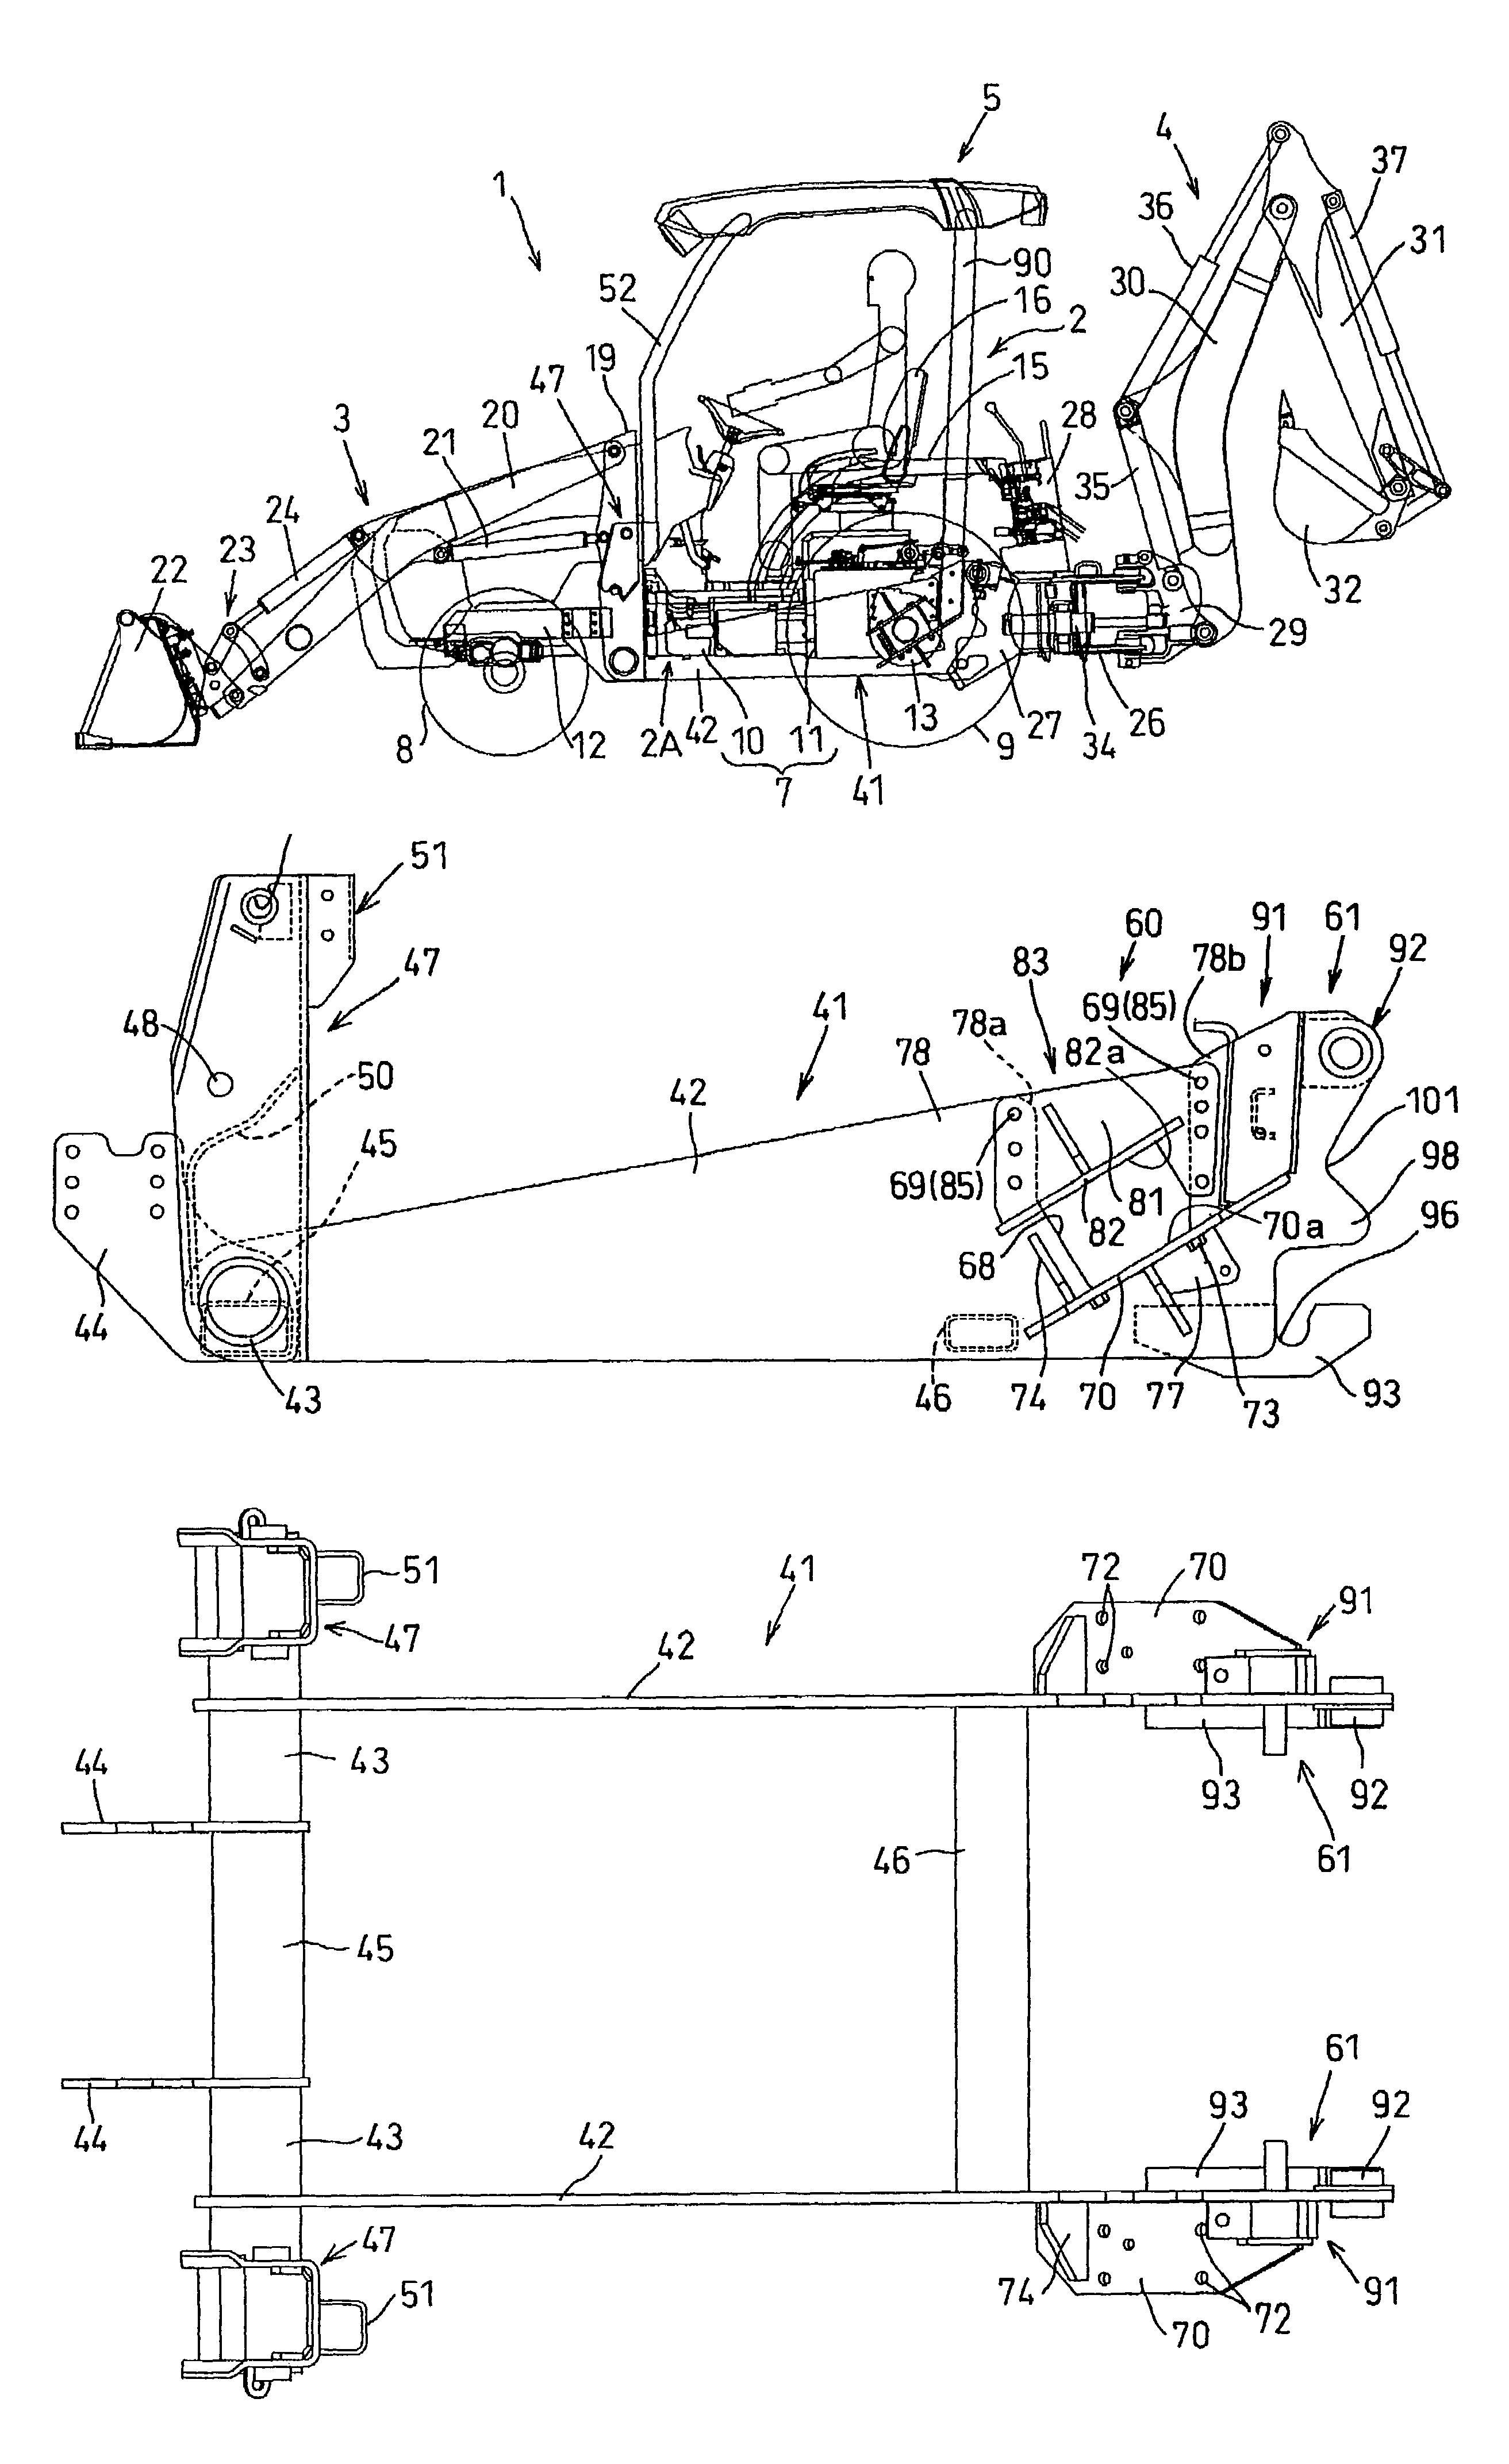 Mounting frame unit for attaching working implements to a tractor body